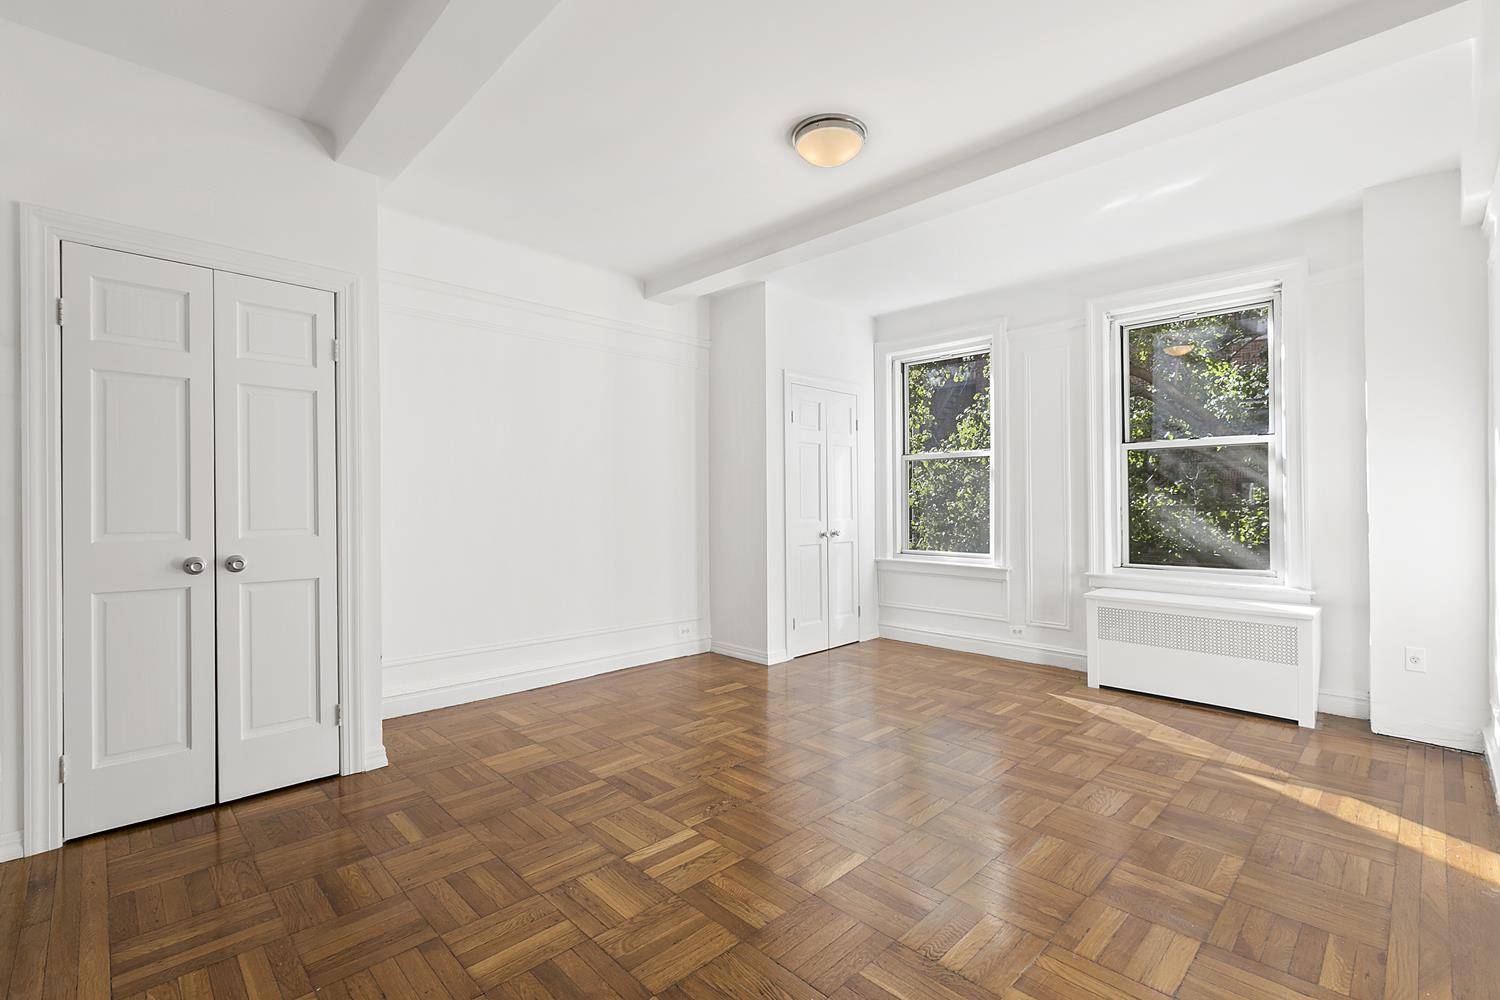 PRE WAR SPLENDOR.. This charming, renovated Pre War apartment has a spacious living room, formal dining room, 2 Queen sized bedrooms and 2 full baths.